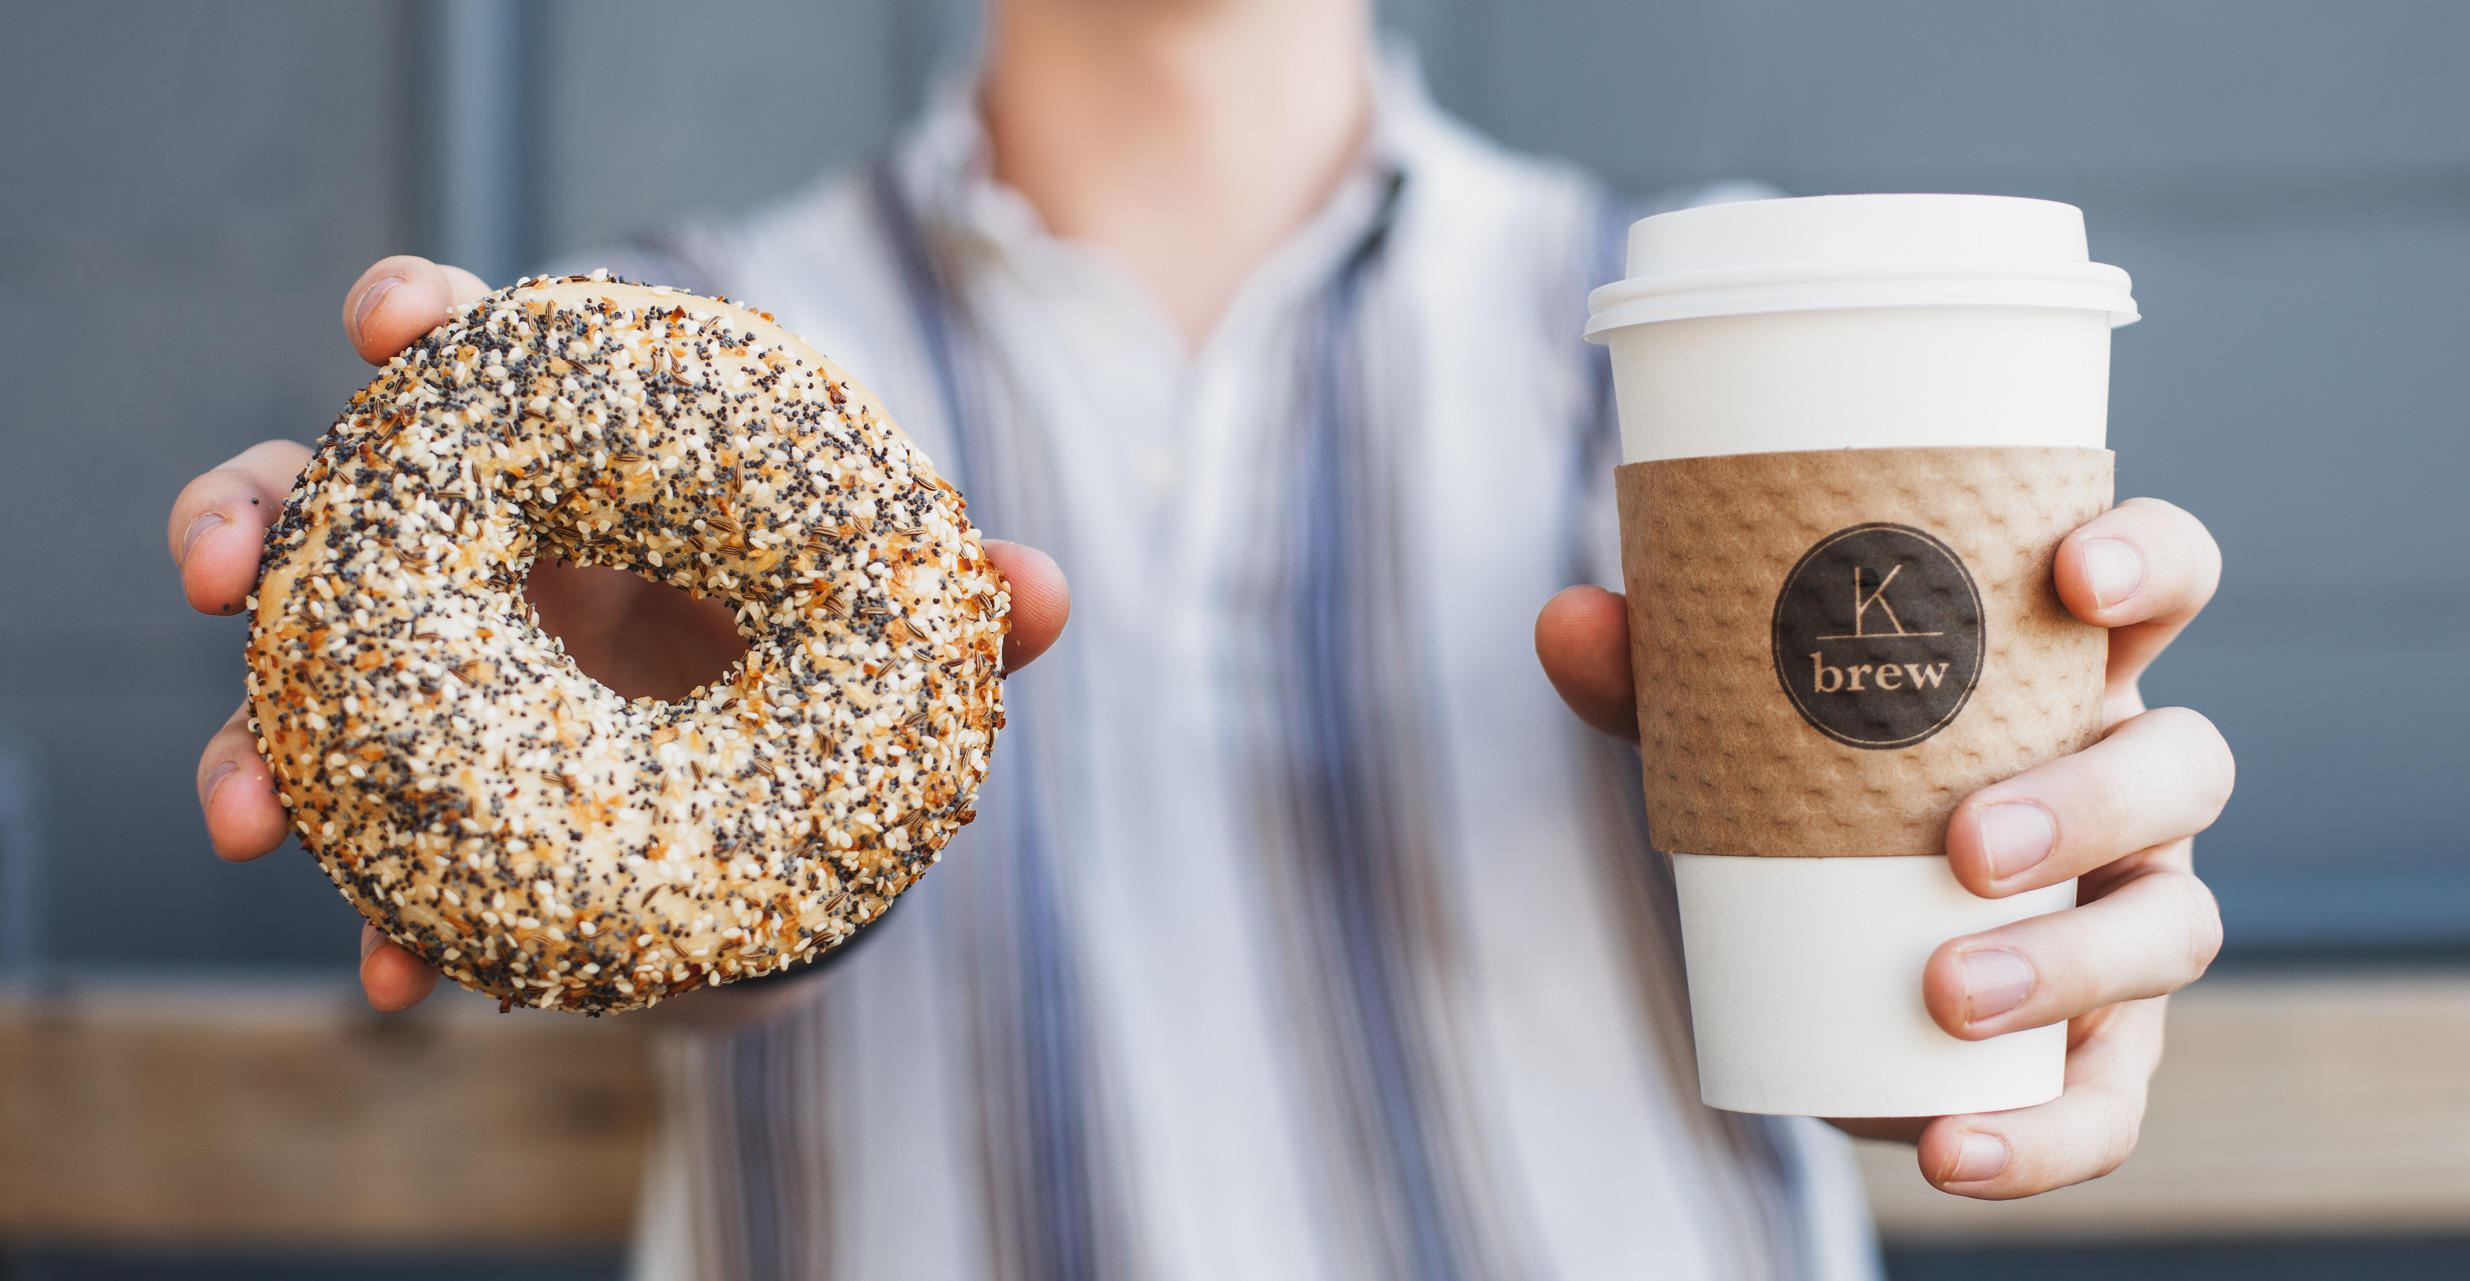 Locally Roasted Coffee & Handmade Bagels in Knoxville, TN